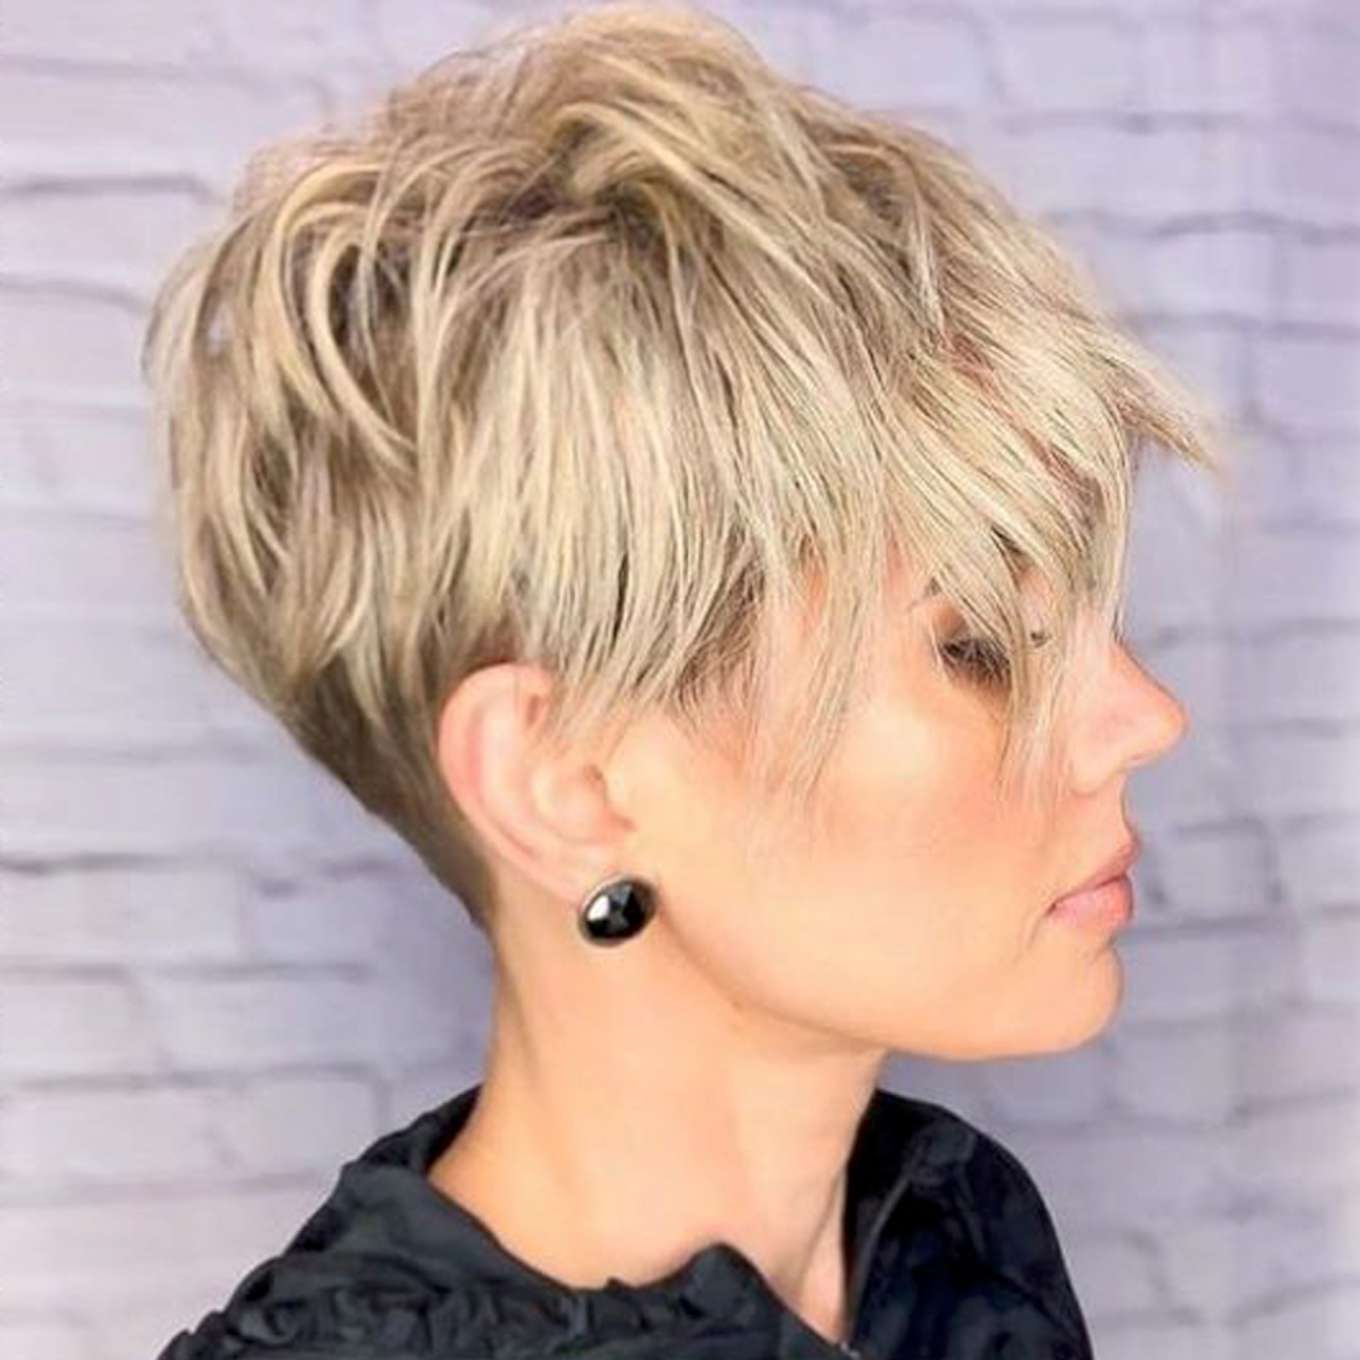 Sofia Rogers Short Hairstyles – 3